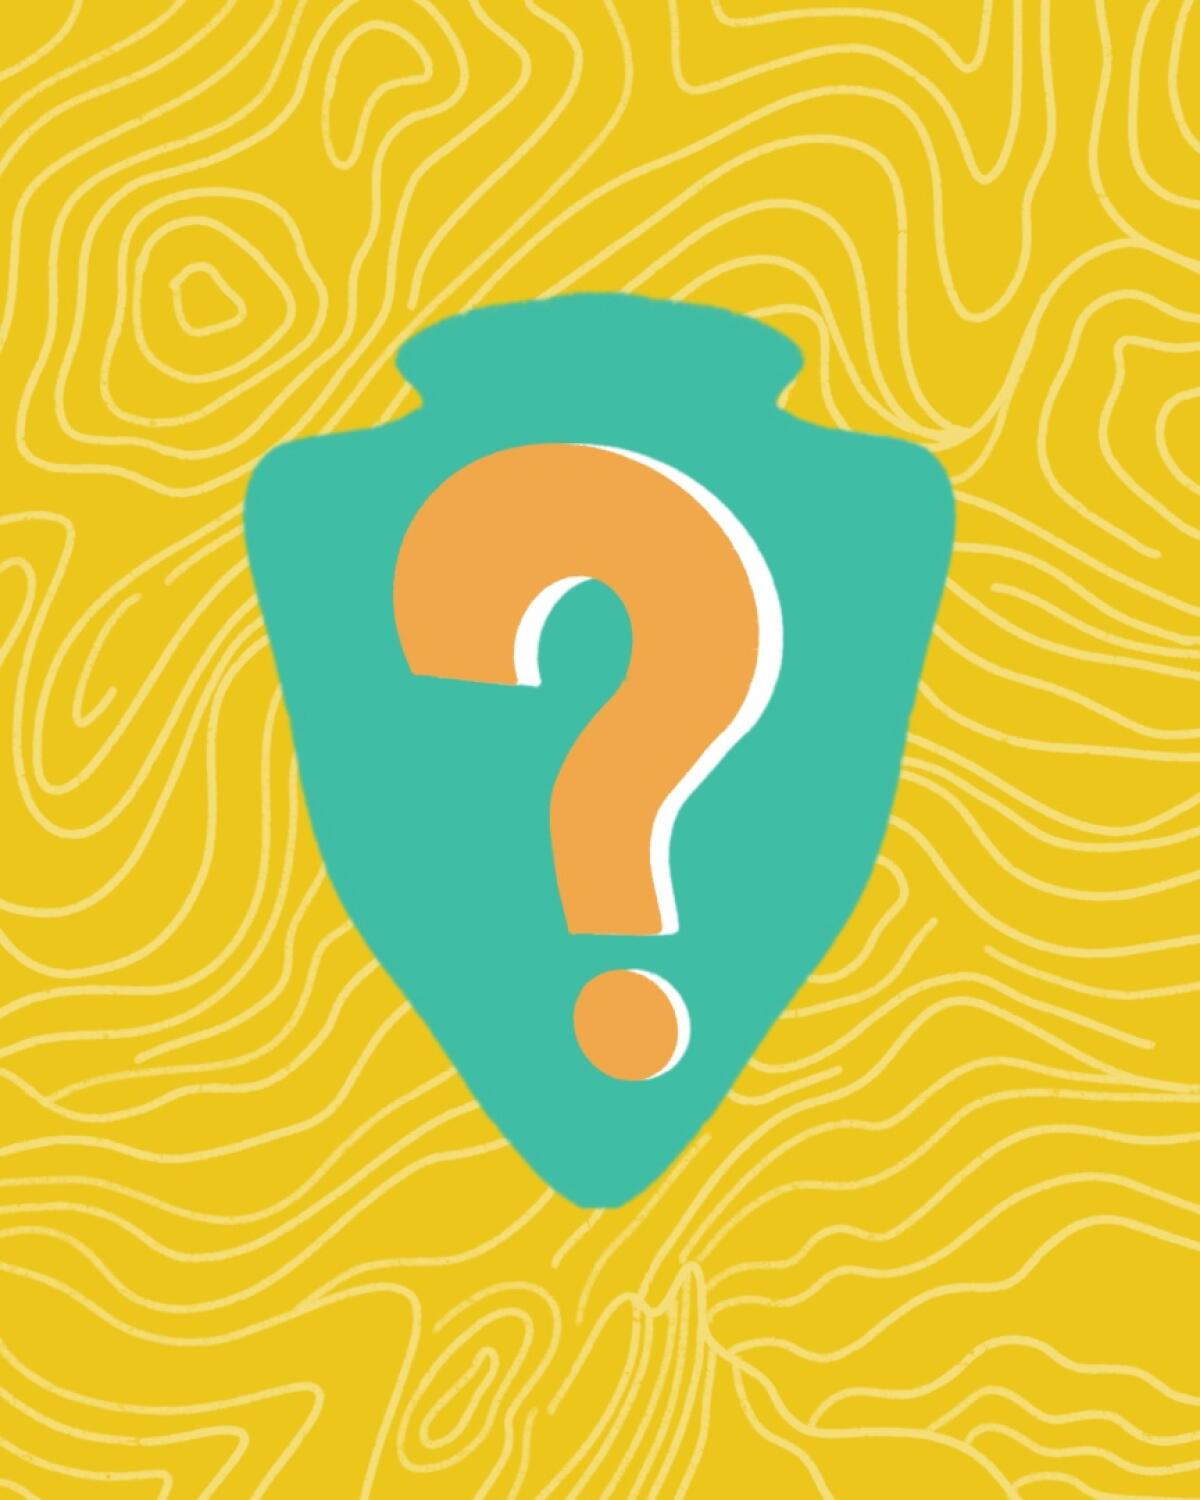 Illustration of the National Park Service logo with a question mark over a topography map